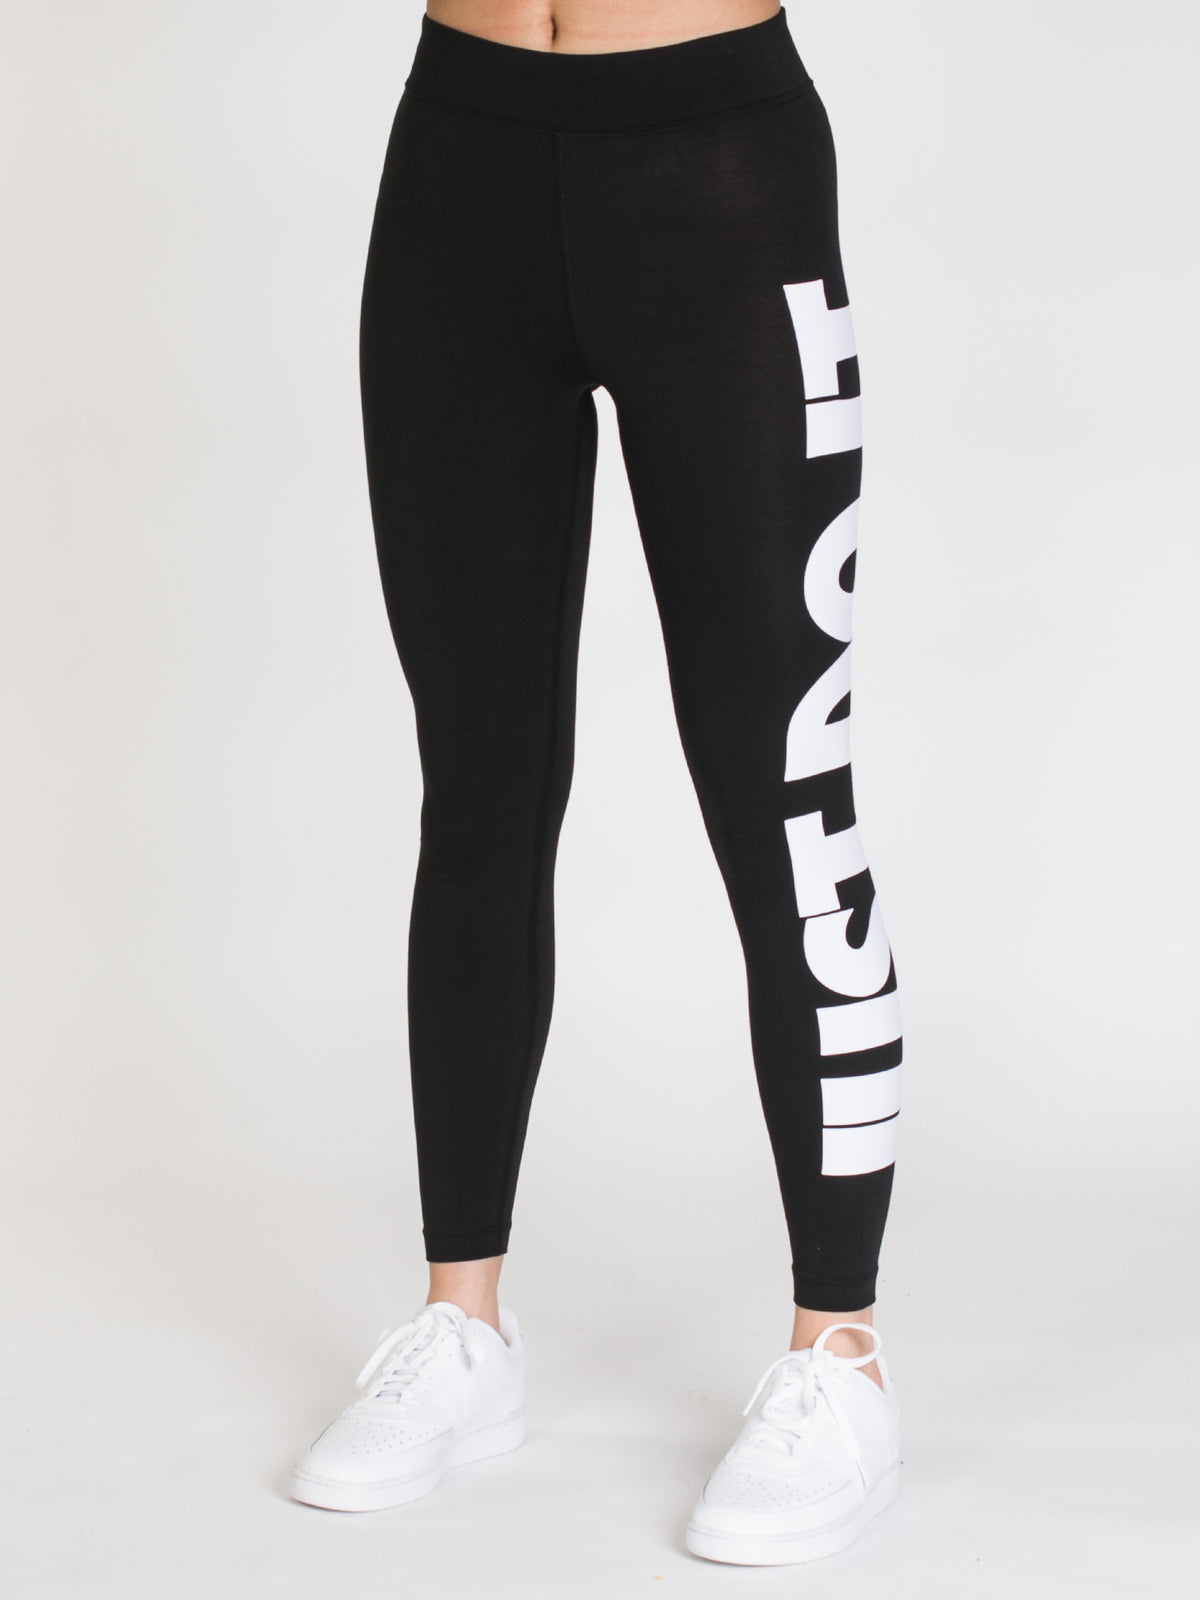 Nike high waisted 7/8 leggings in black with just do it thigh